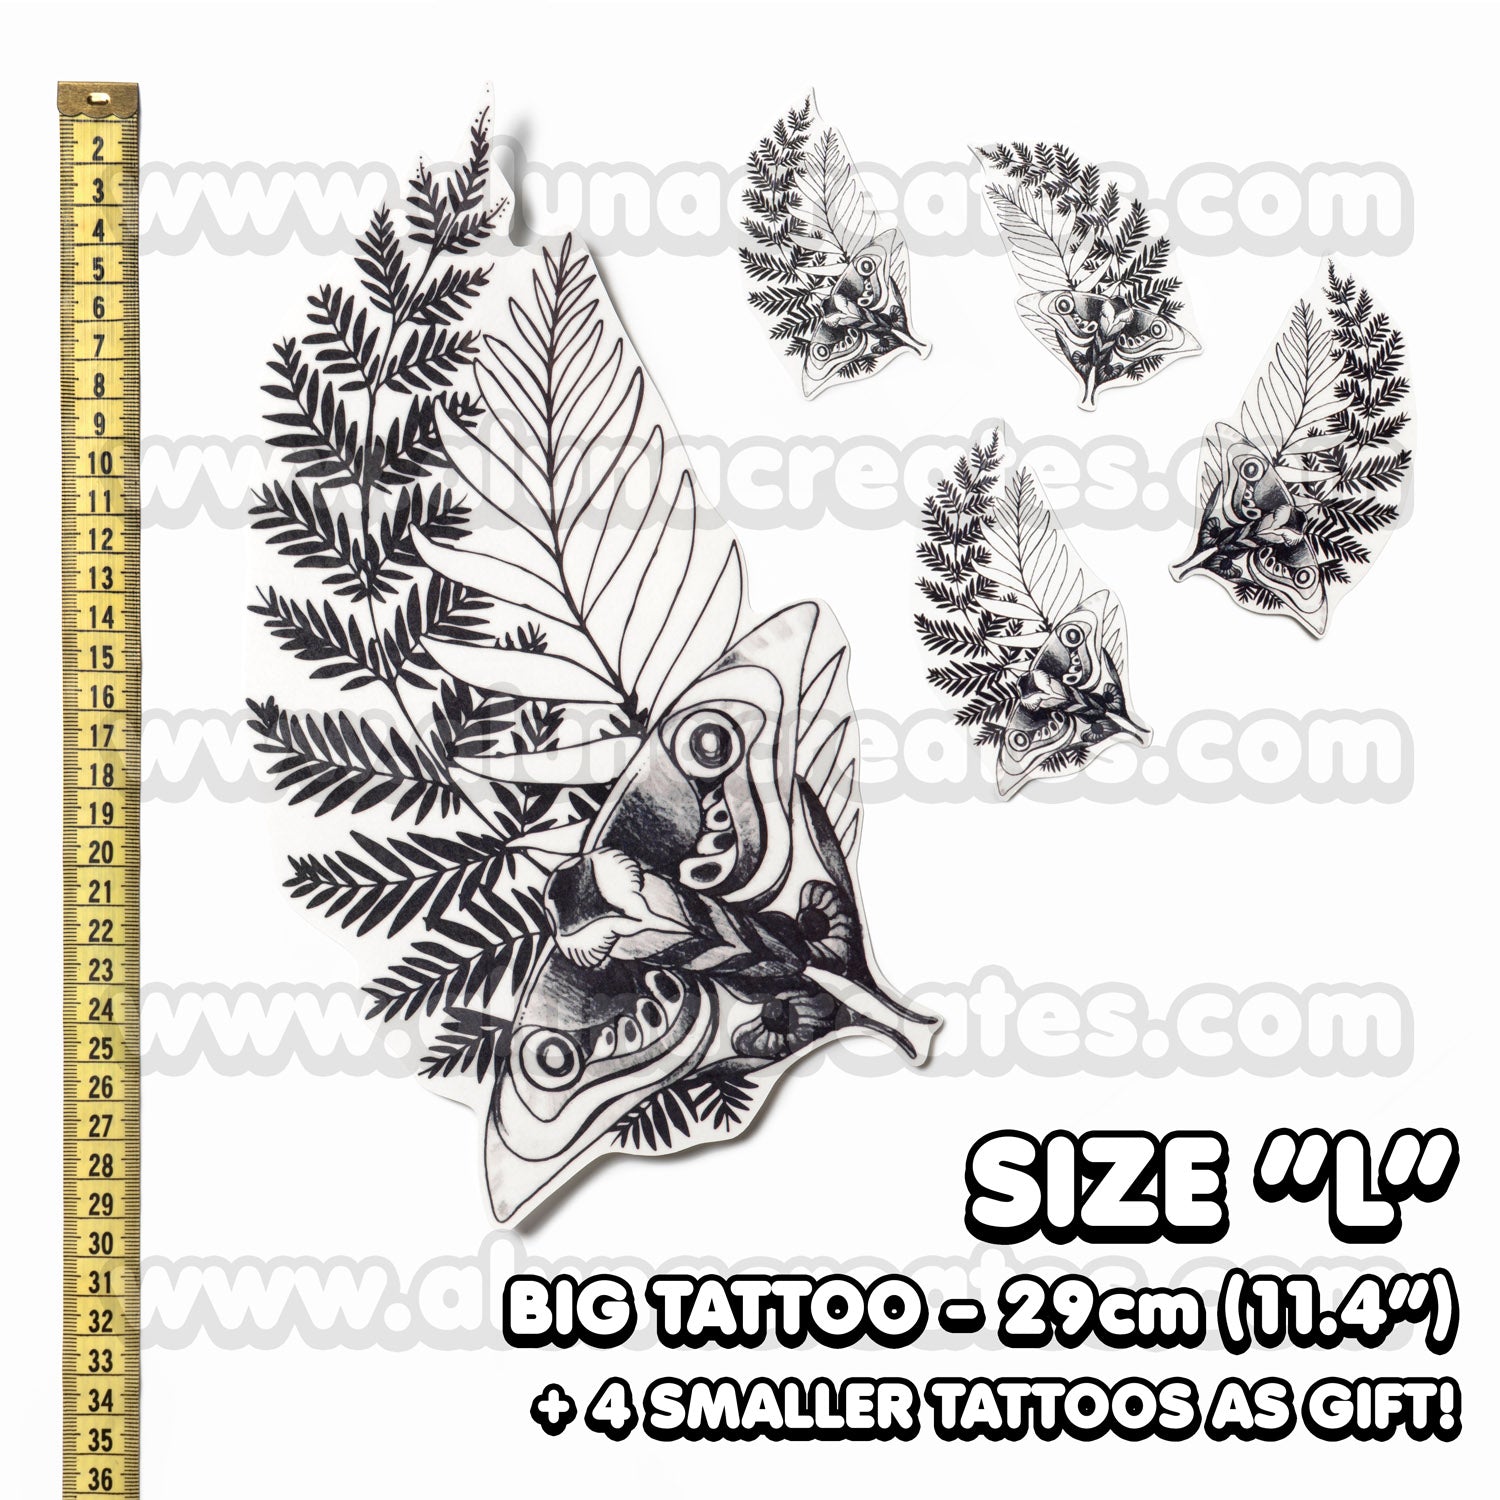 The Last of Us Ellie Cosplay Temporary Tattoo Stickers – FM-Anime